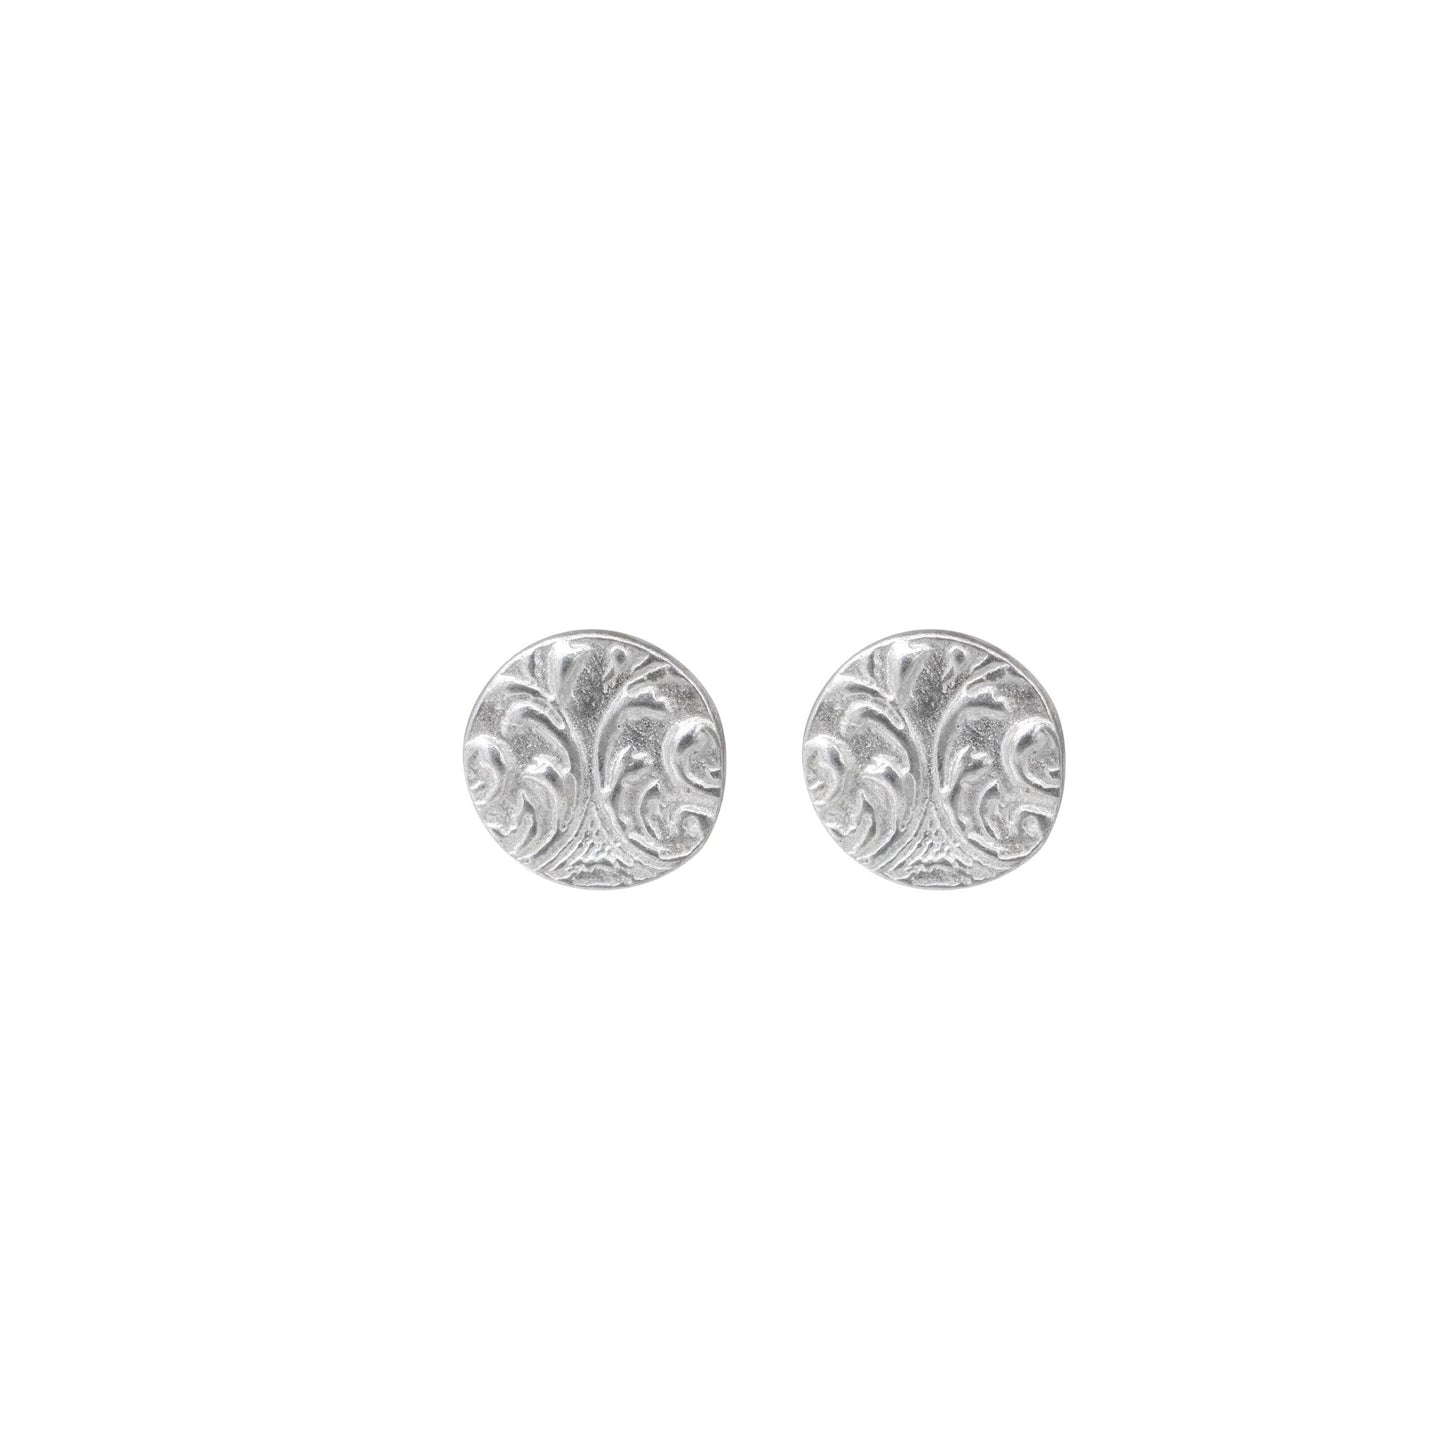 Country Girl studs - small